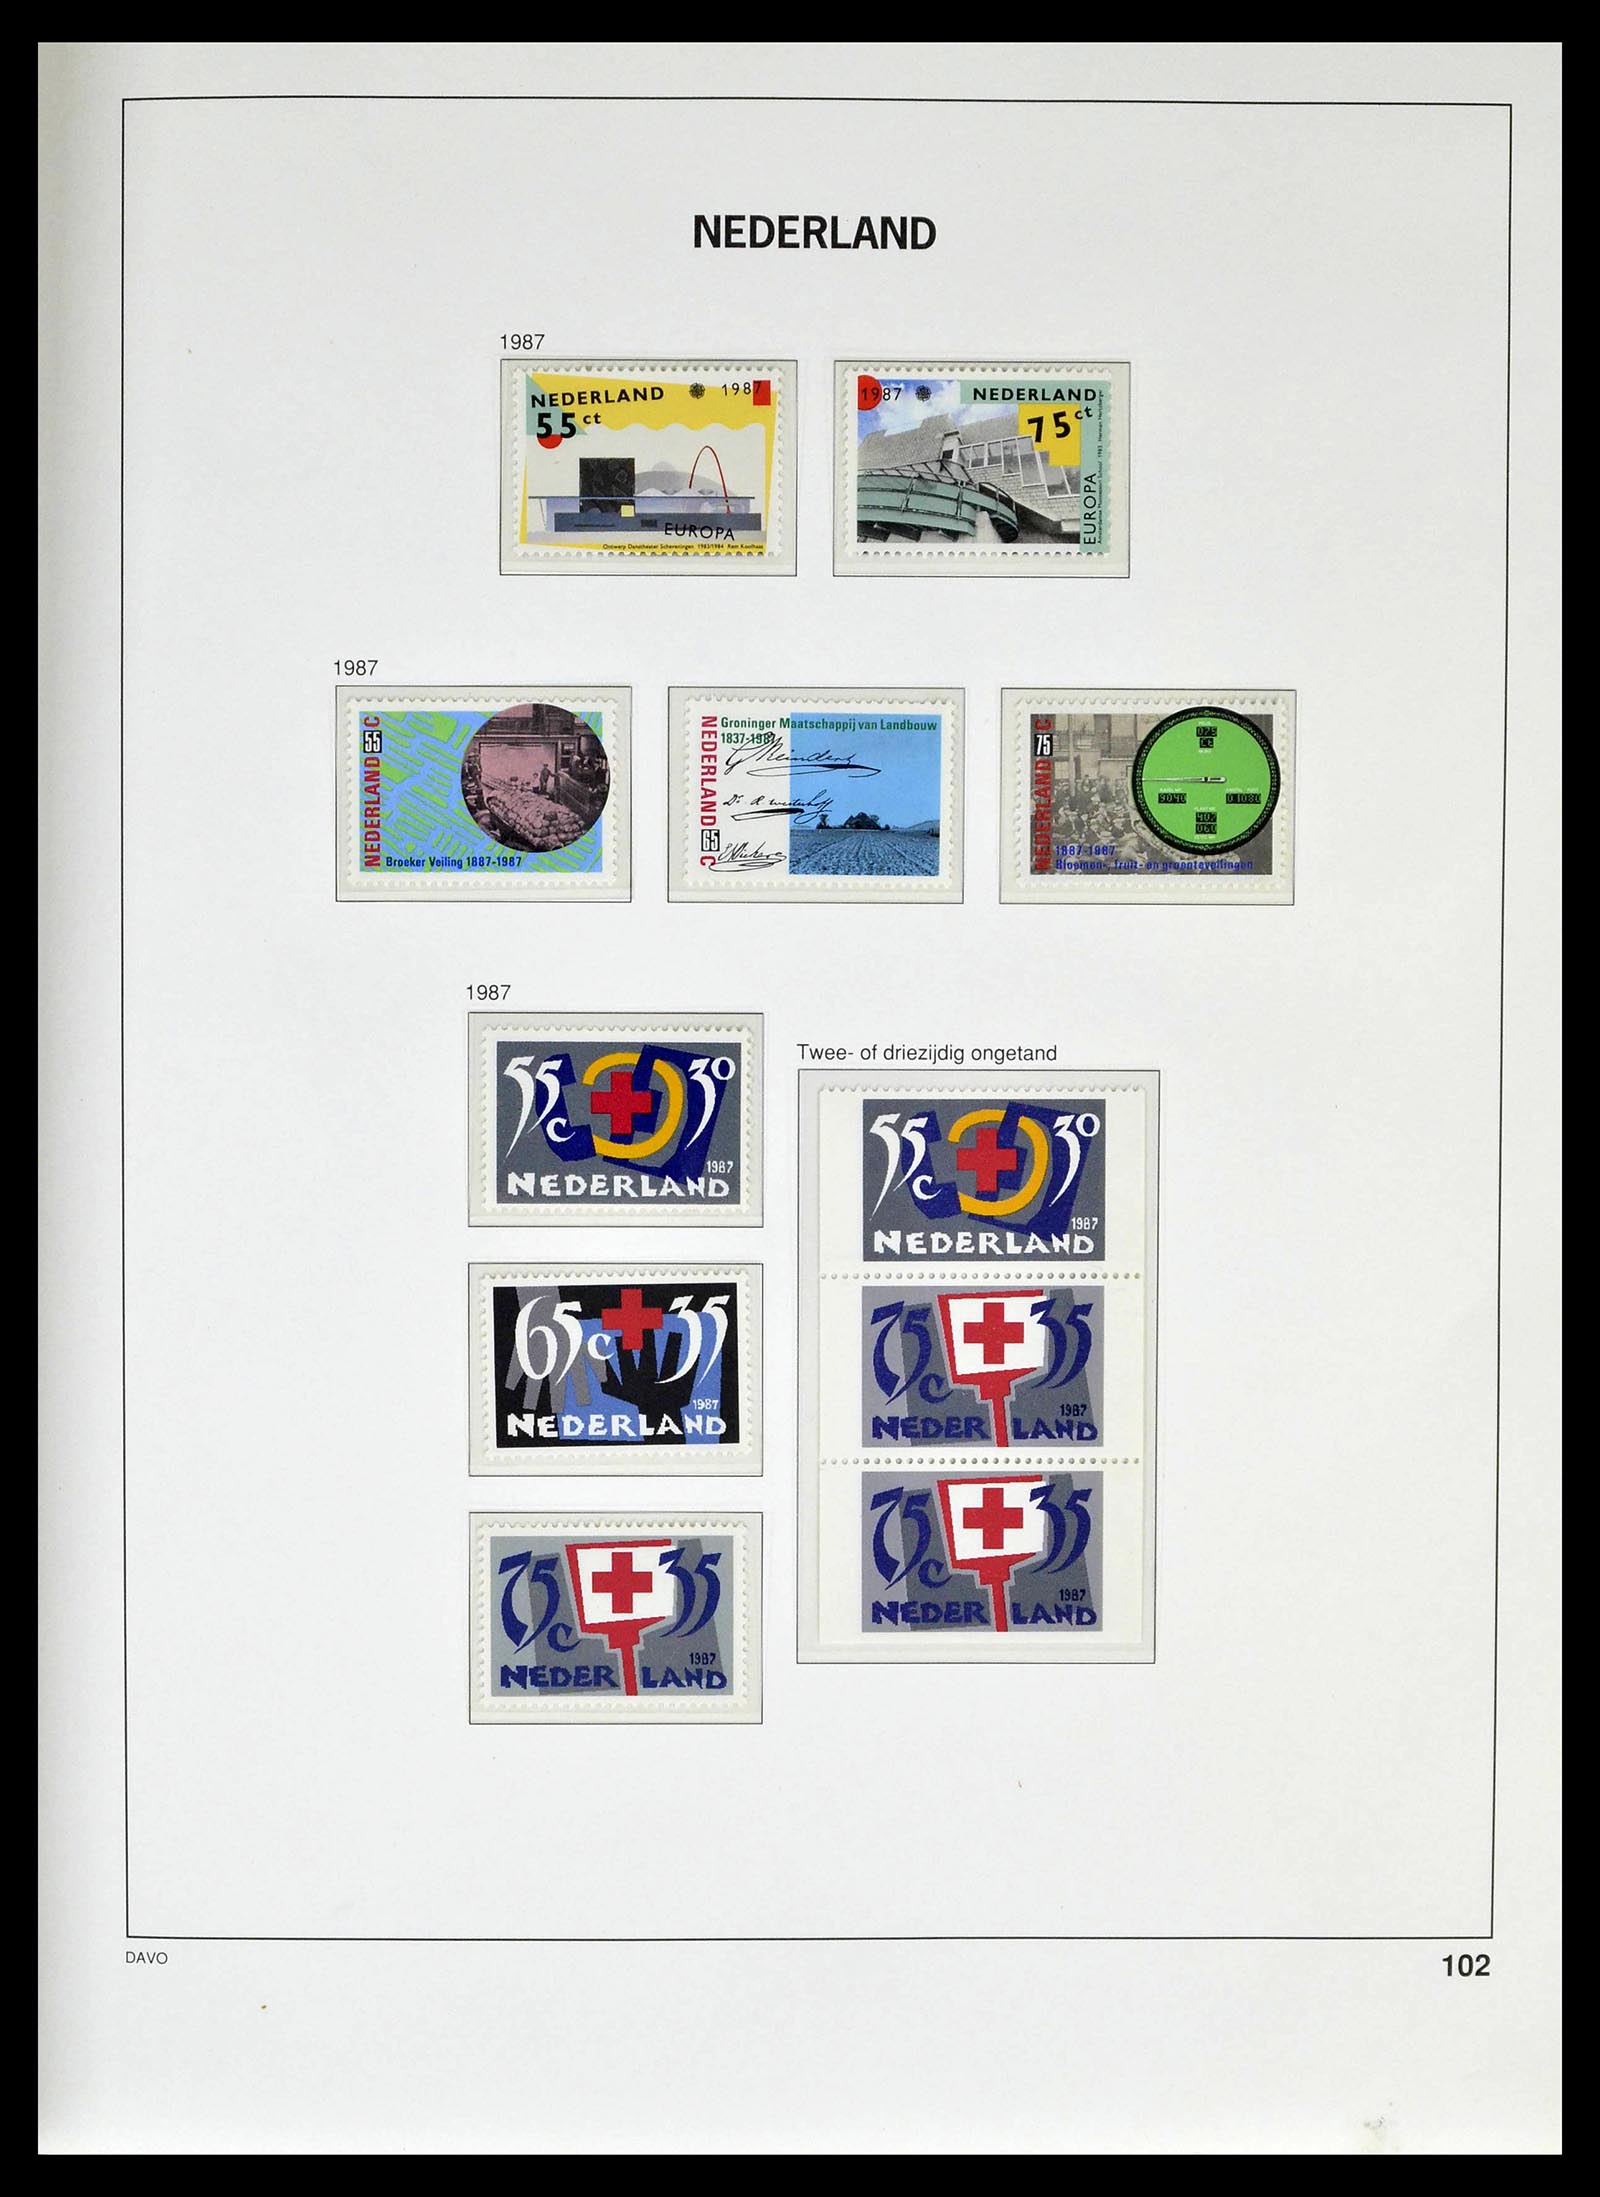 39136 0033 - Stamp collection 39136 Netherlands 1975-2020!